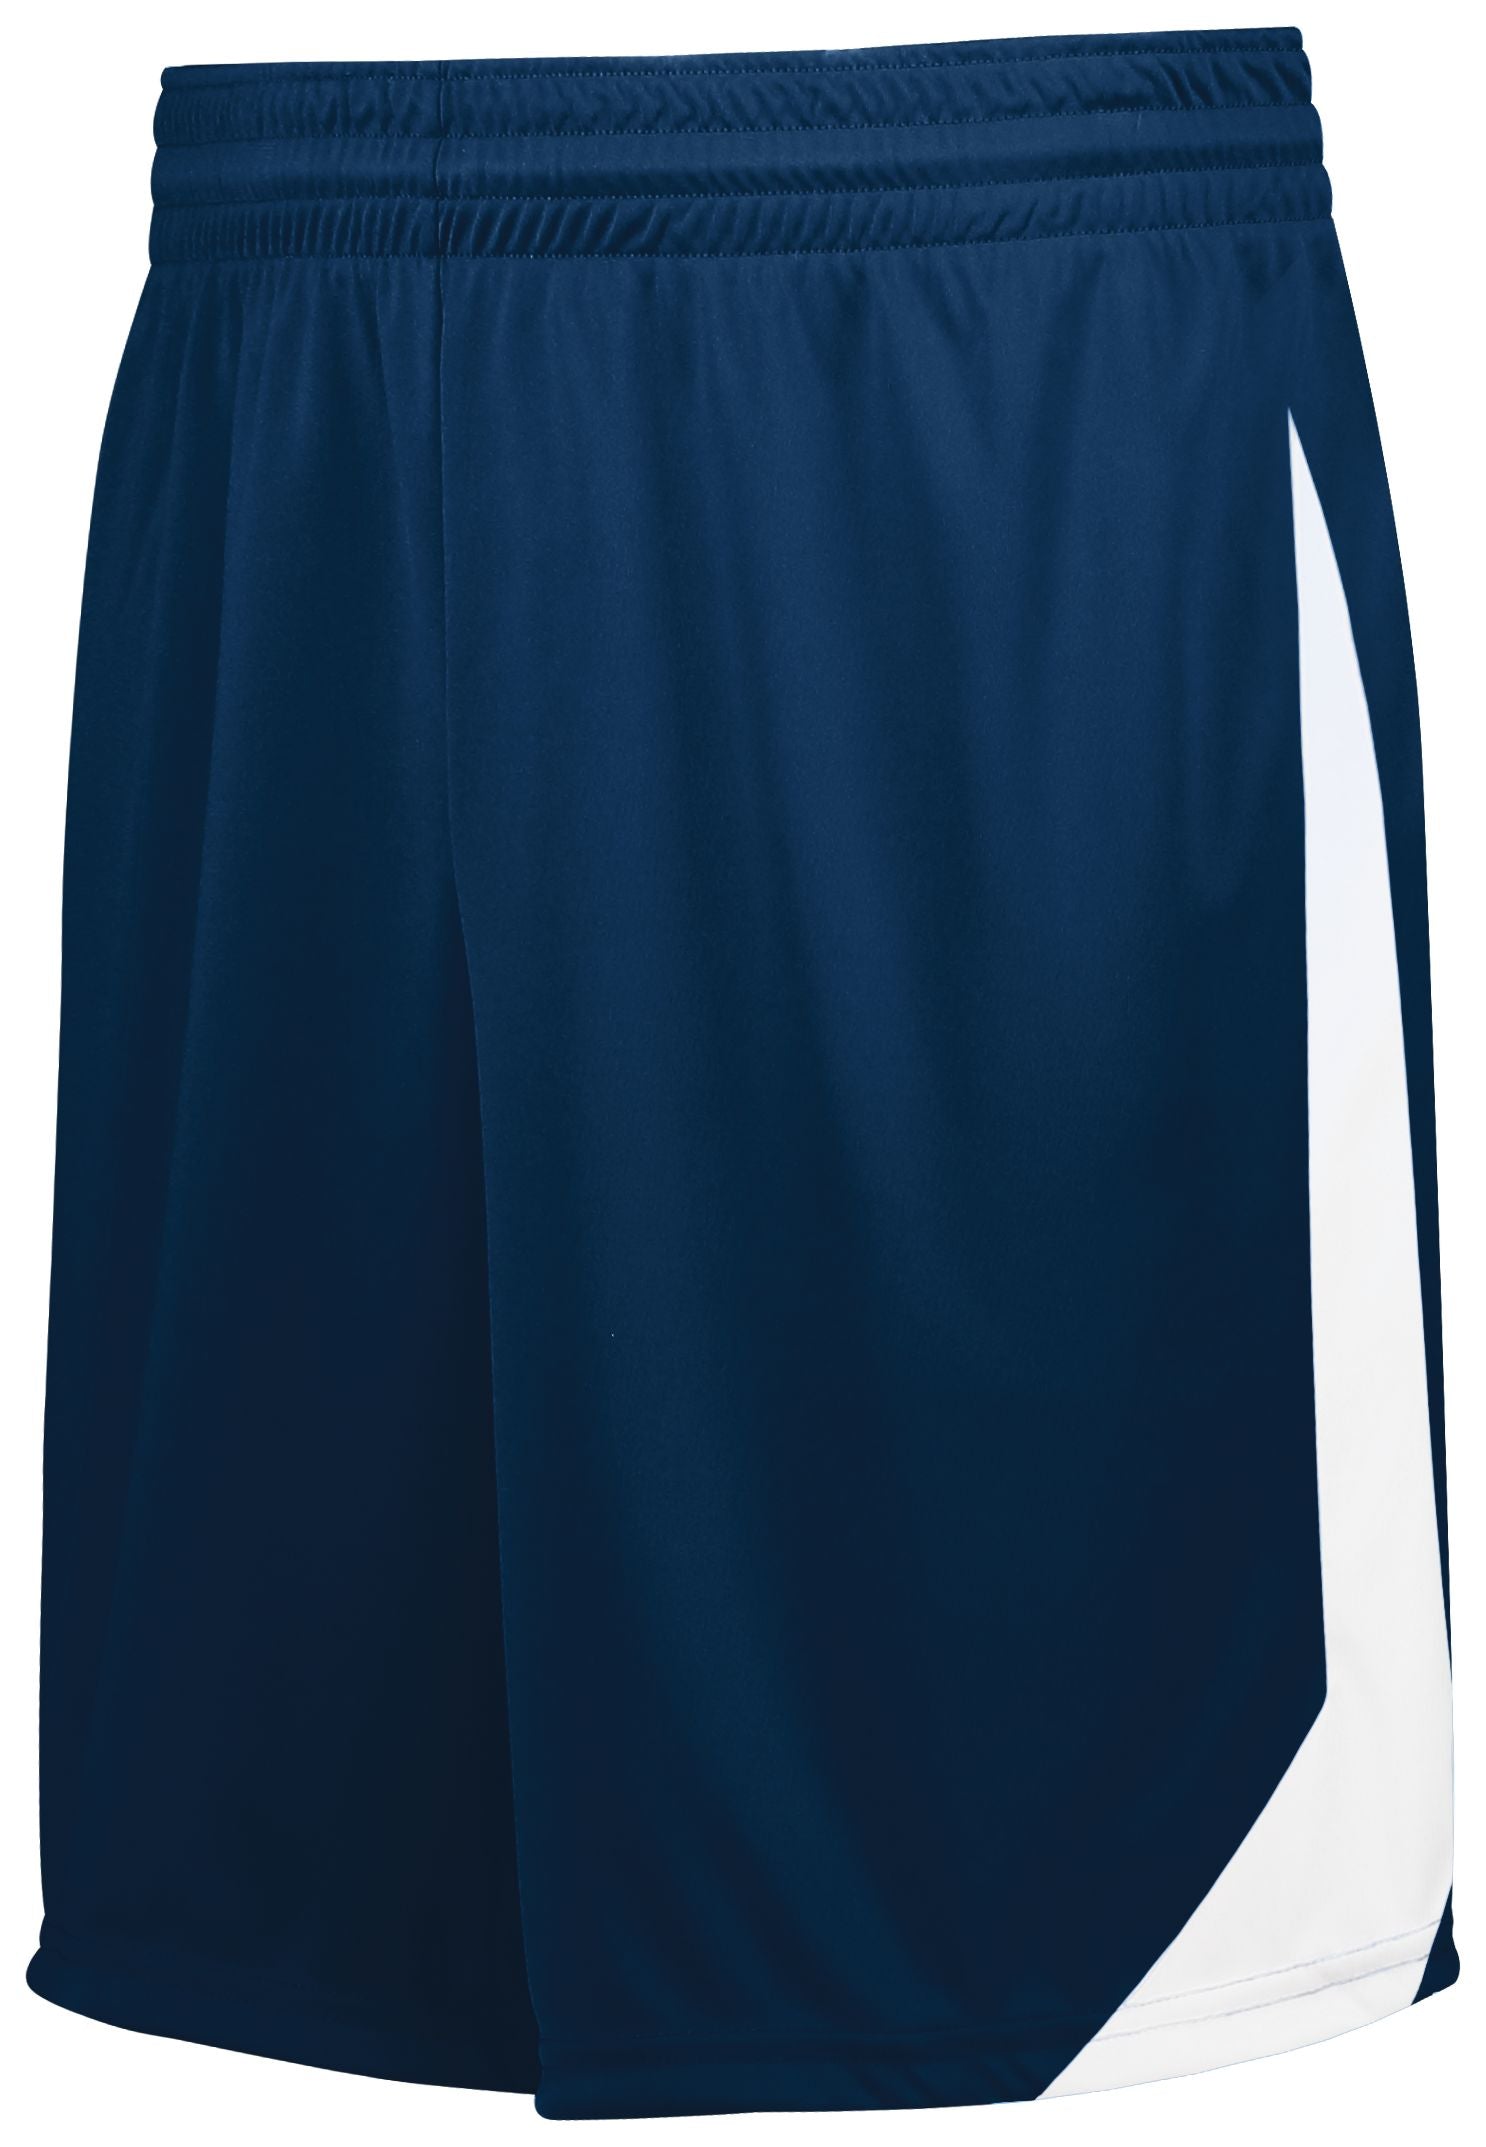 High 5 Youth Athletico Shorts in Navy/White  -Part of the Youth, Youth-Shorts, High5-Products, Soccer, All-Sports-1 product lines at KanaleyCreations.com